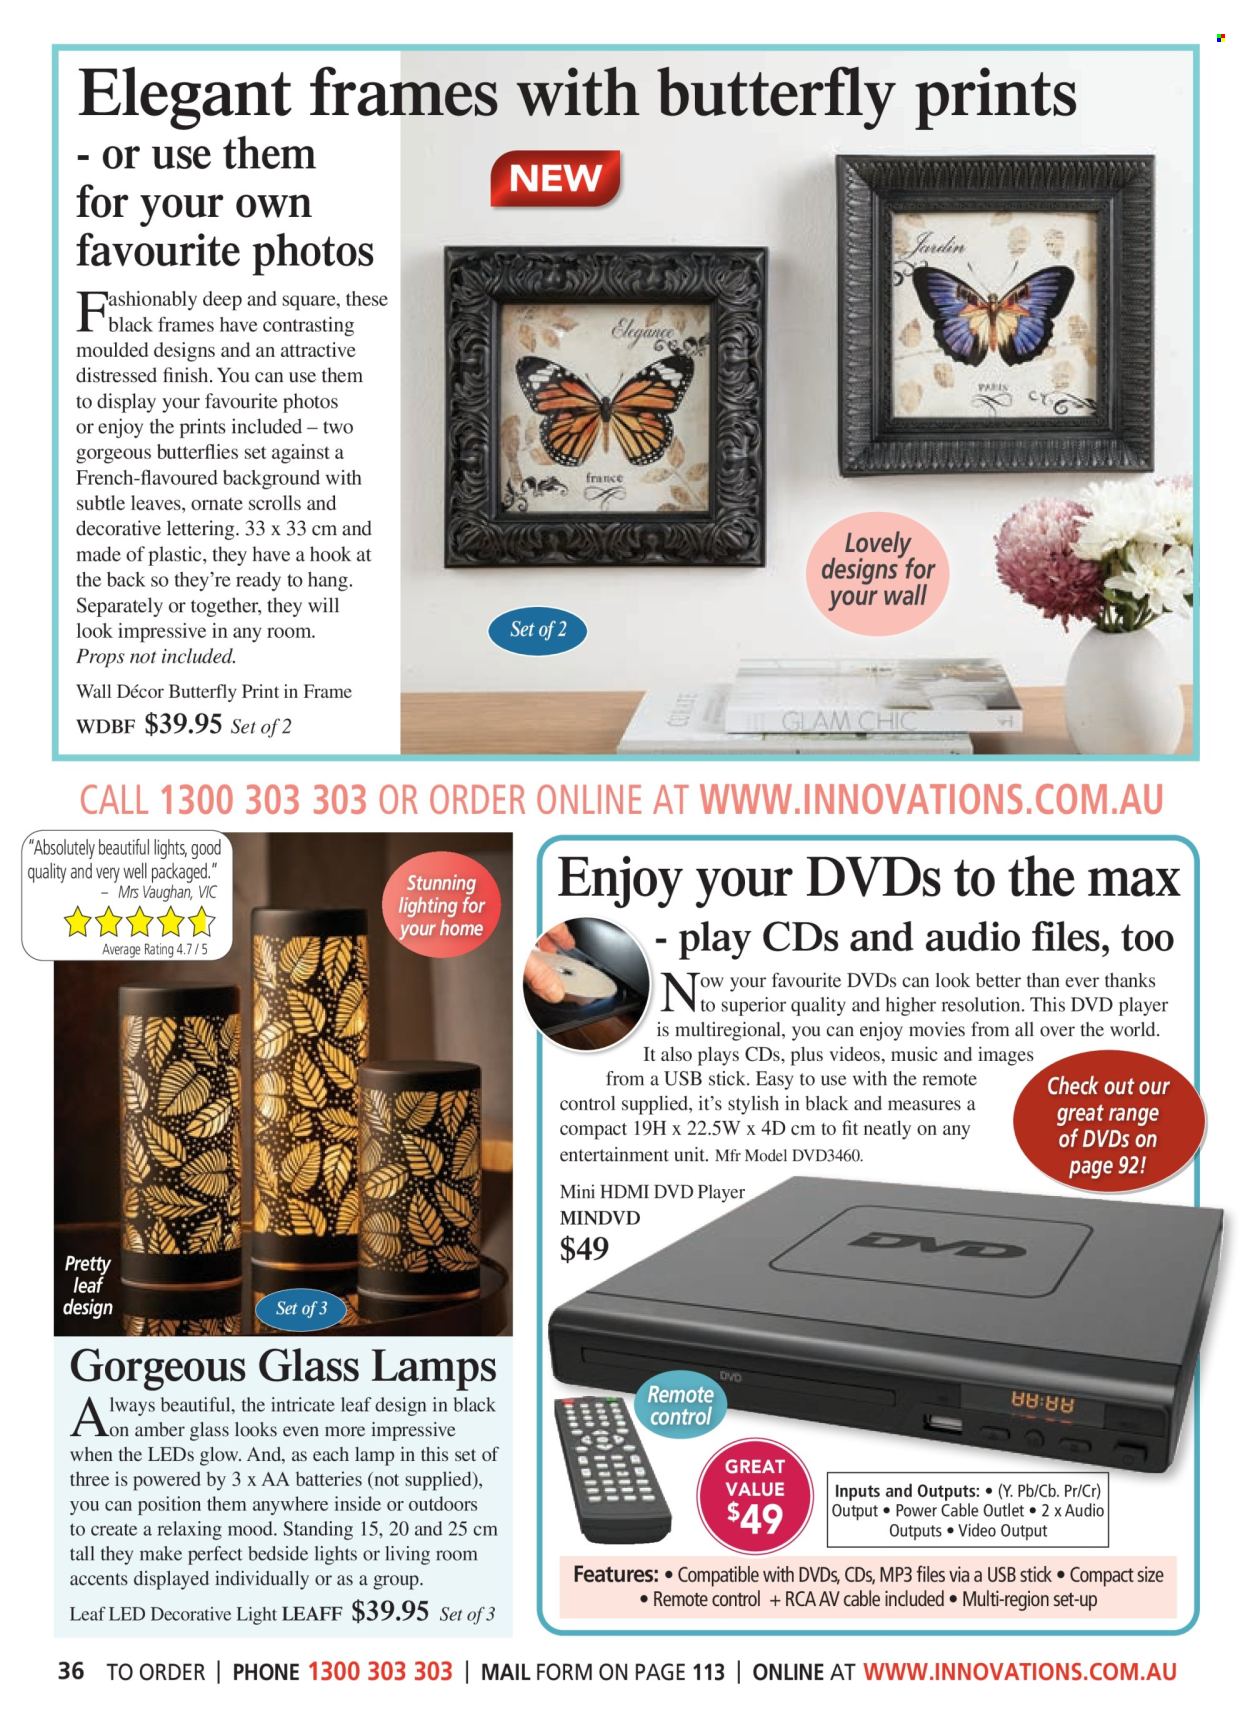 thumbnail - Innovations Catalogue - Sales products - hook, bag, dvd player, RCA, remote control, lamp, lighting, decorative light. Page 36.